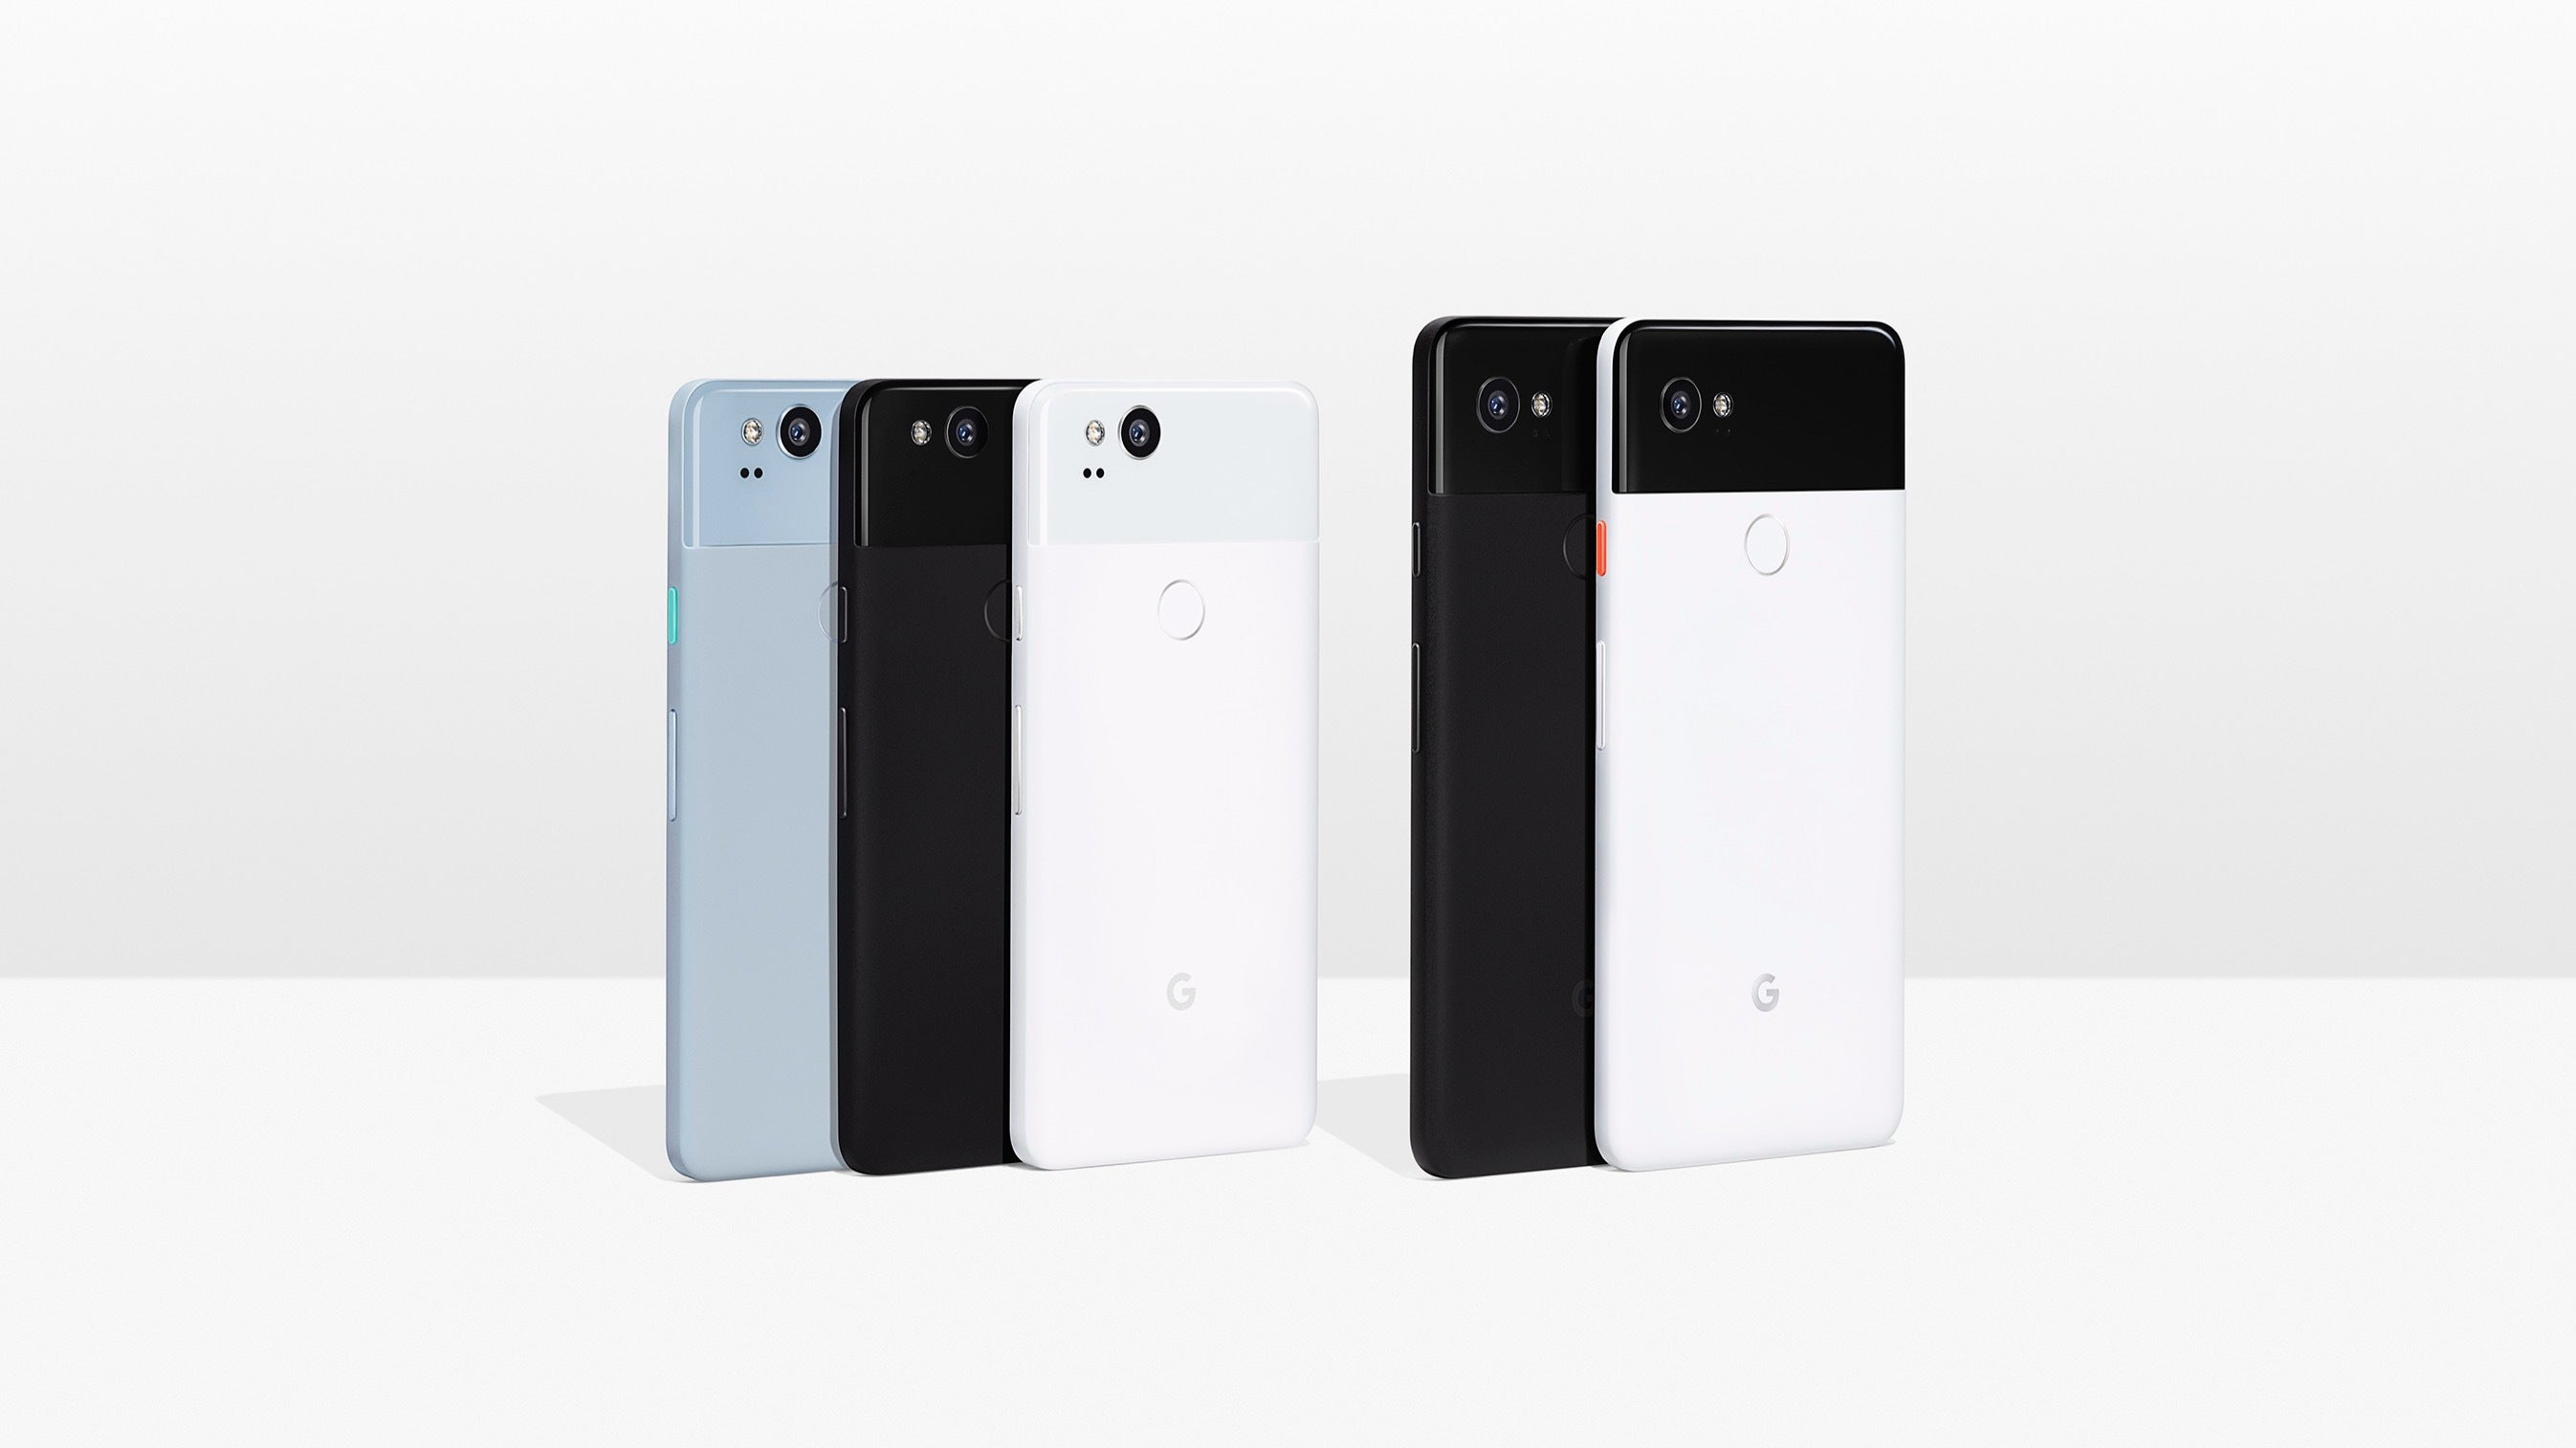 The Pixel 2 XL&nbsp;was one of the most recognizable phones around. It also happened to be very solid all-rounder. Oh, and it was the camera king! - Pixel 6 & 6 Pro: Should Samsung and Apple be worried?